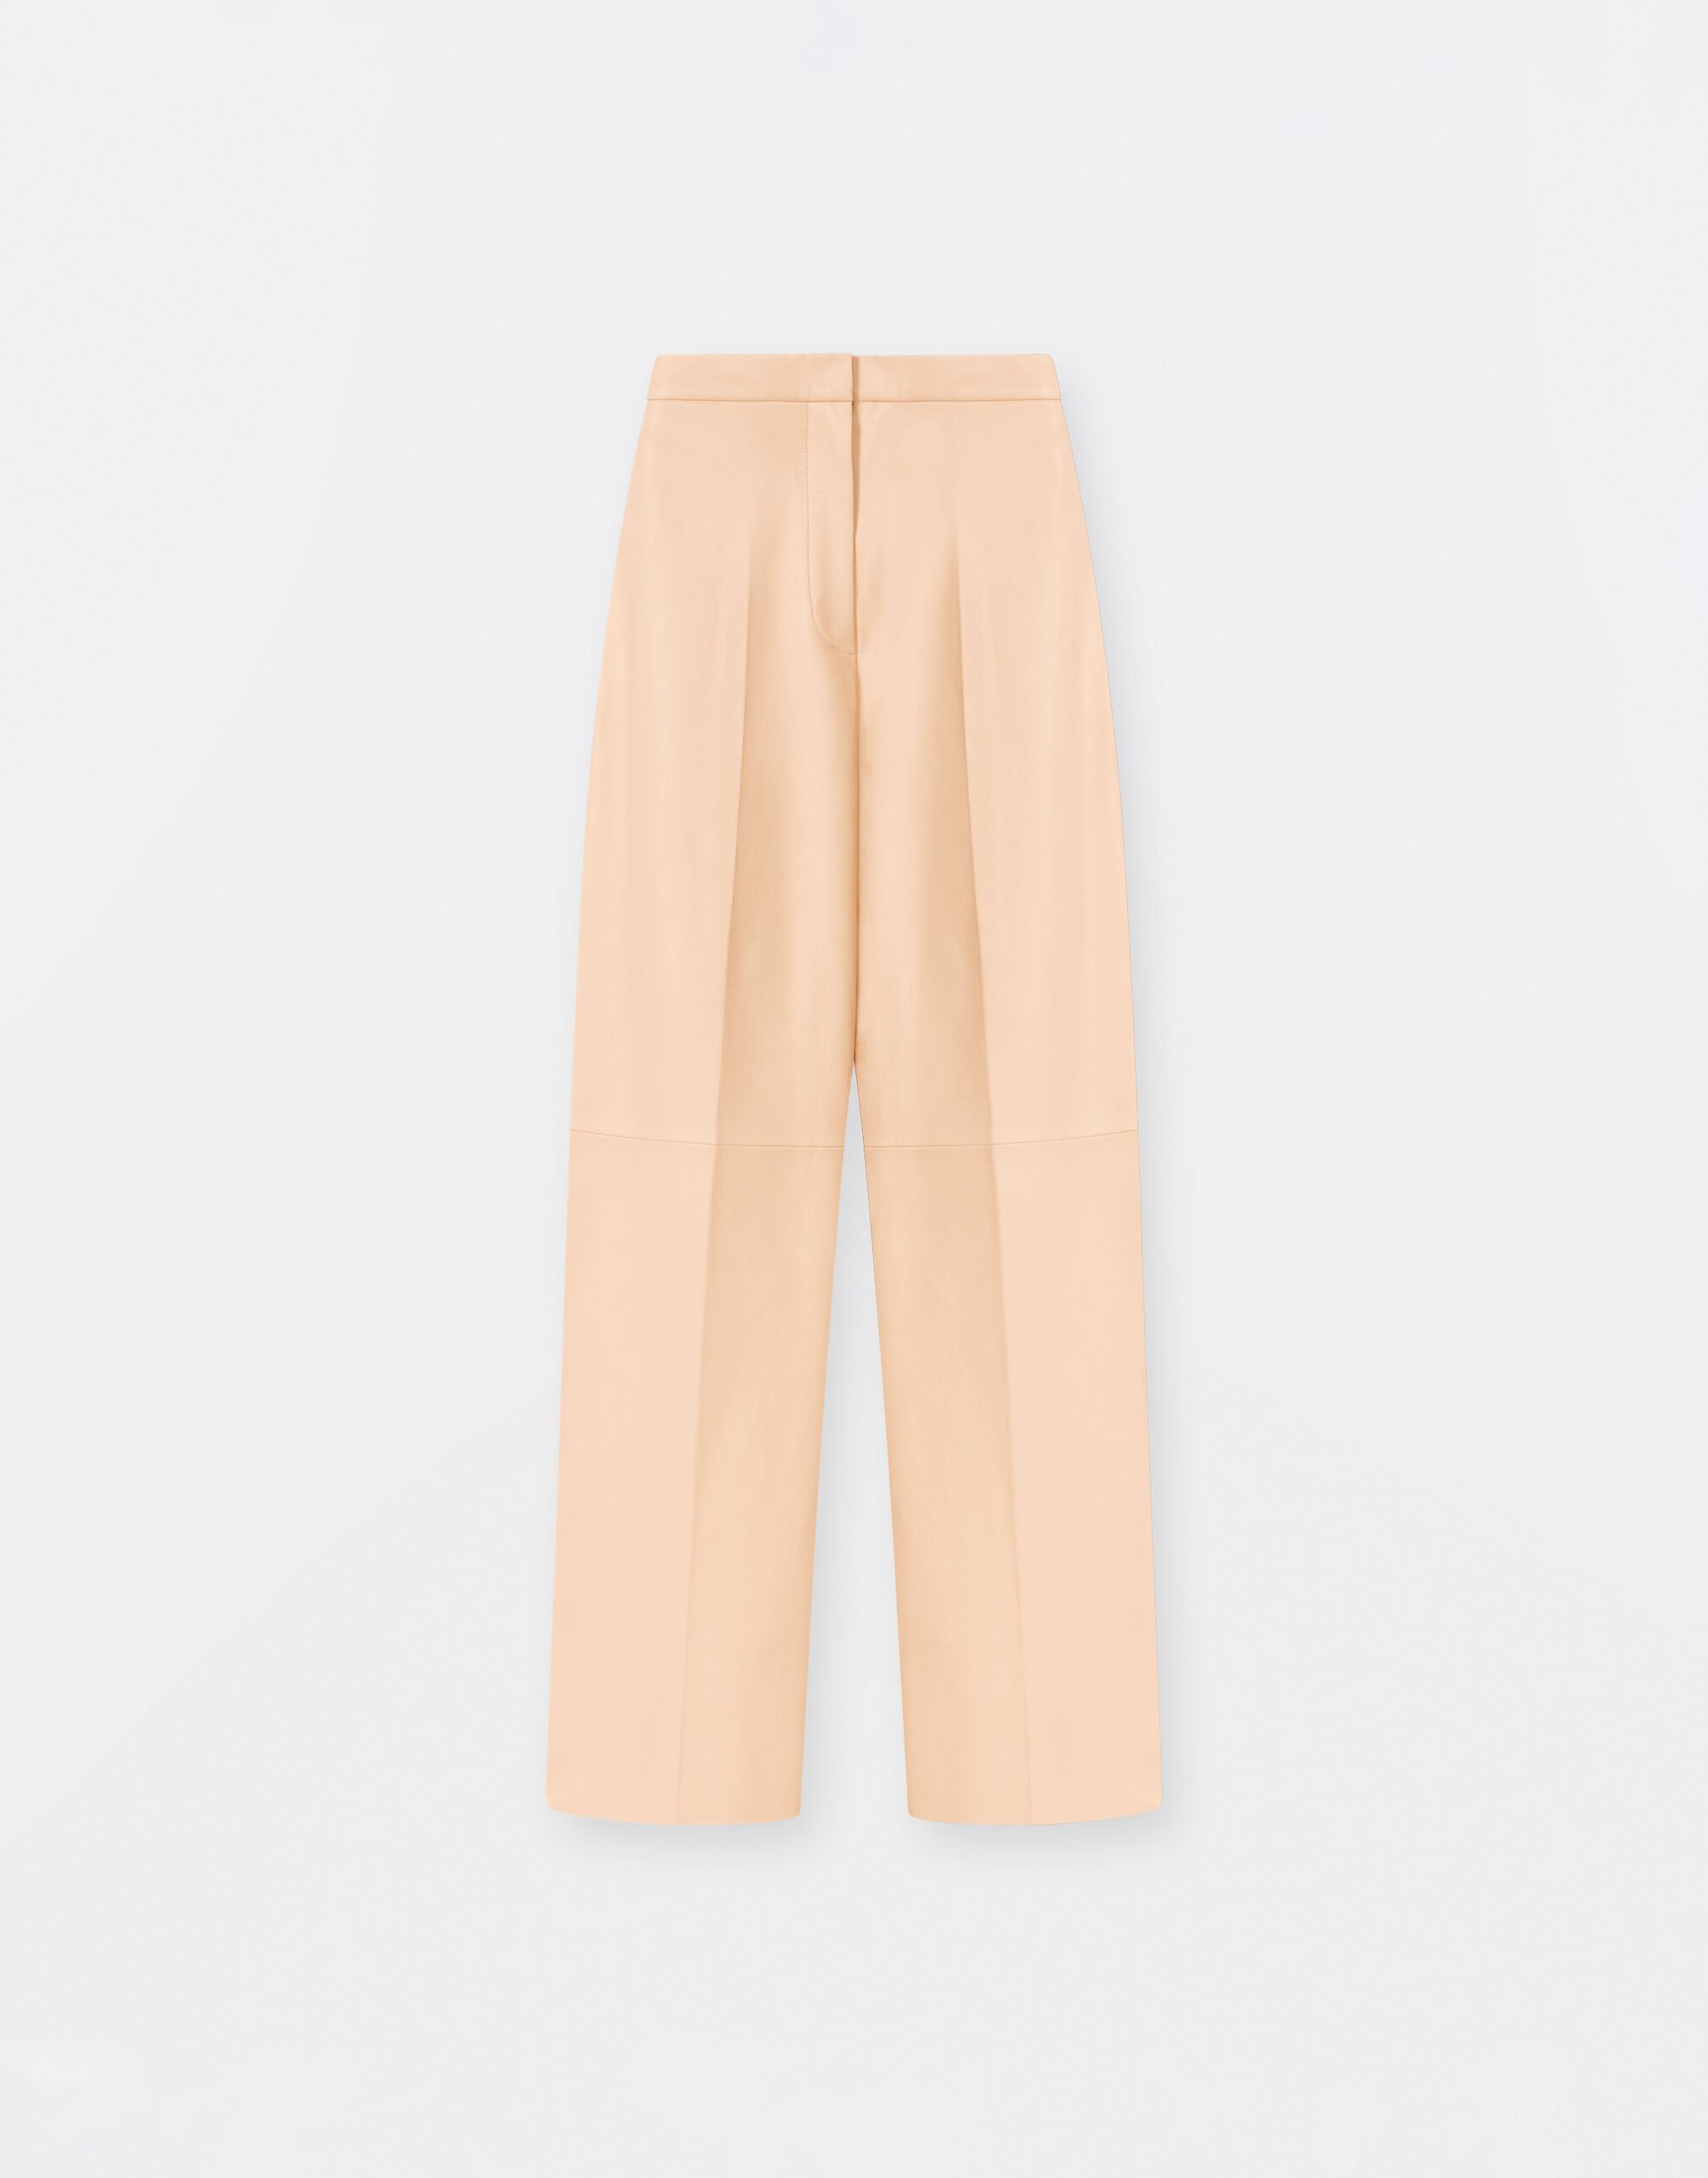 ${brand} Nappa leather trousers, dusty pink ${colorDescription} ${masterID}